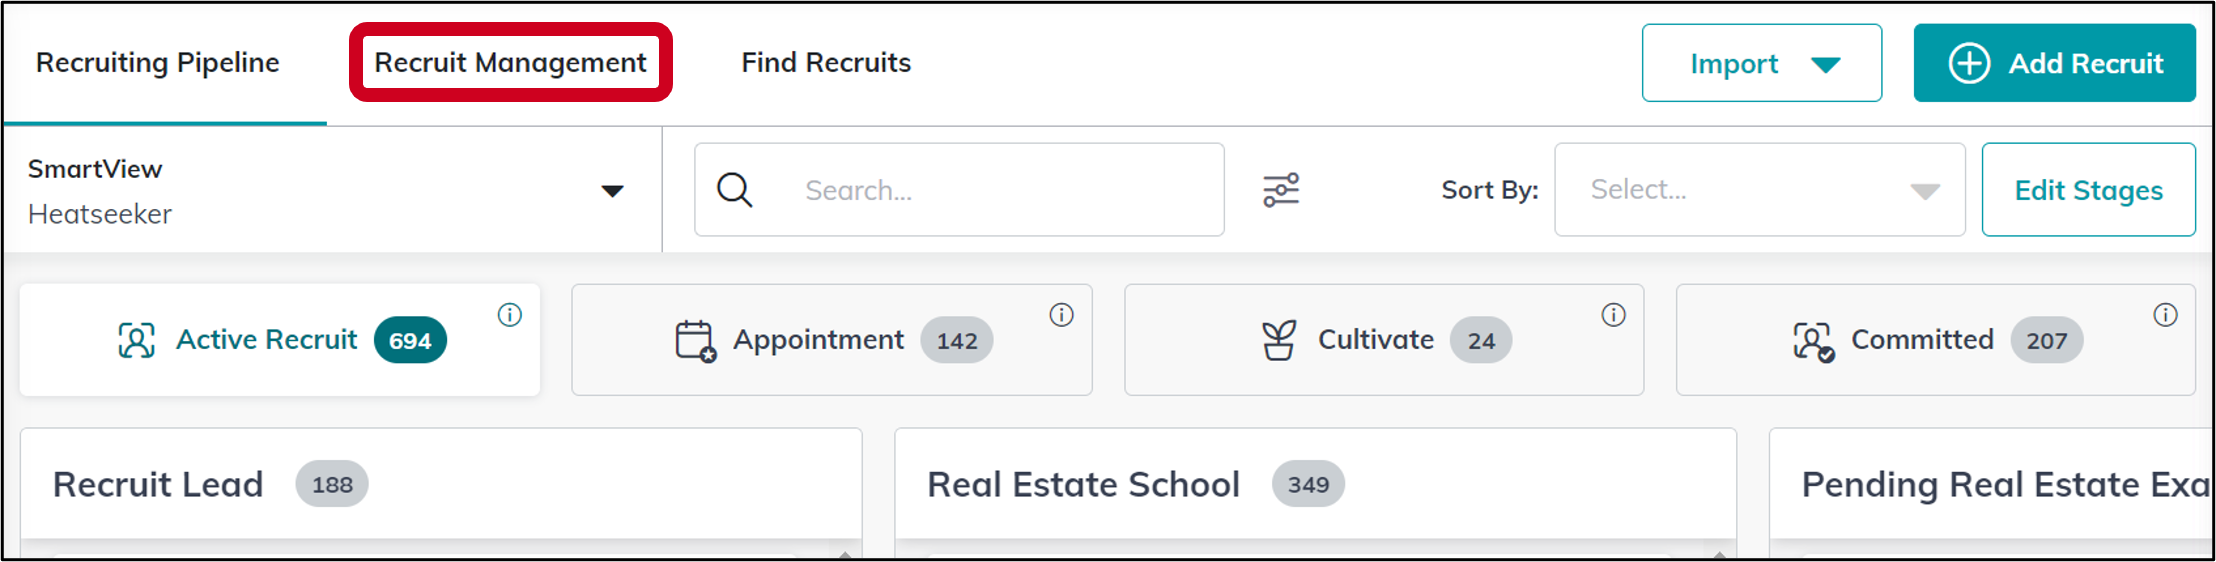 recruits recruit management tab.png